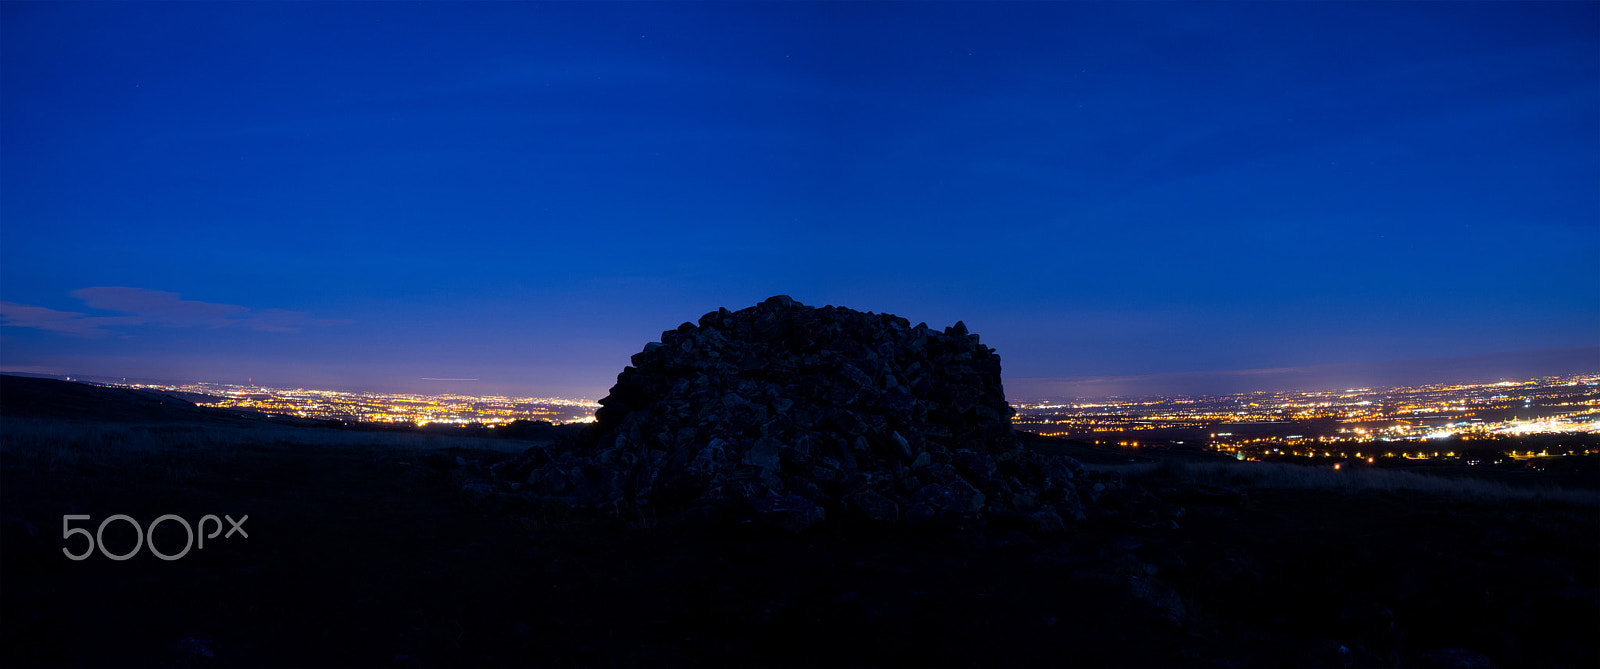 Nikon D600 sample photo. Two lads cairn night photography